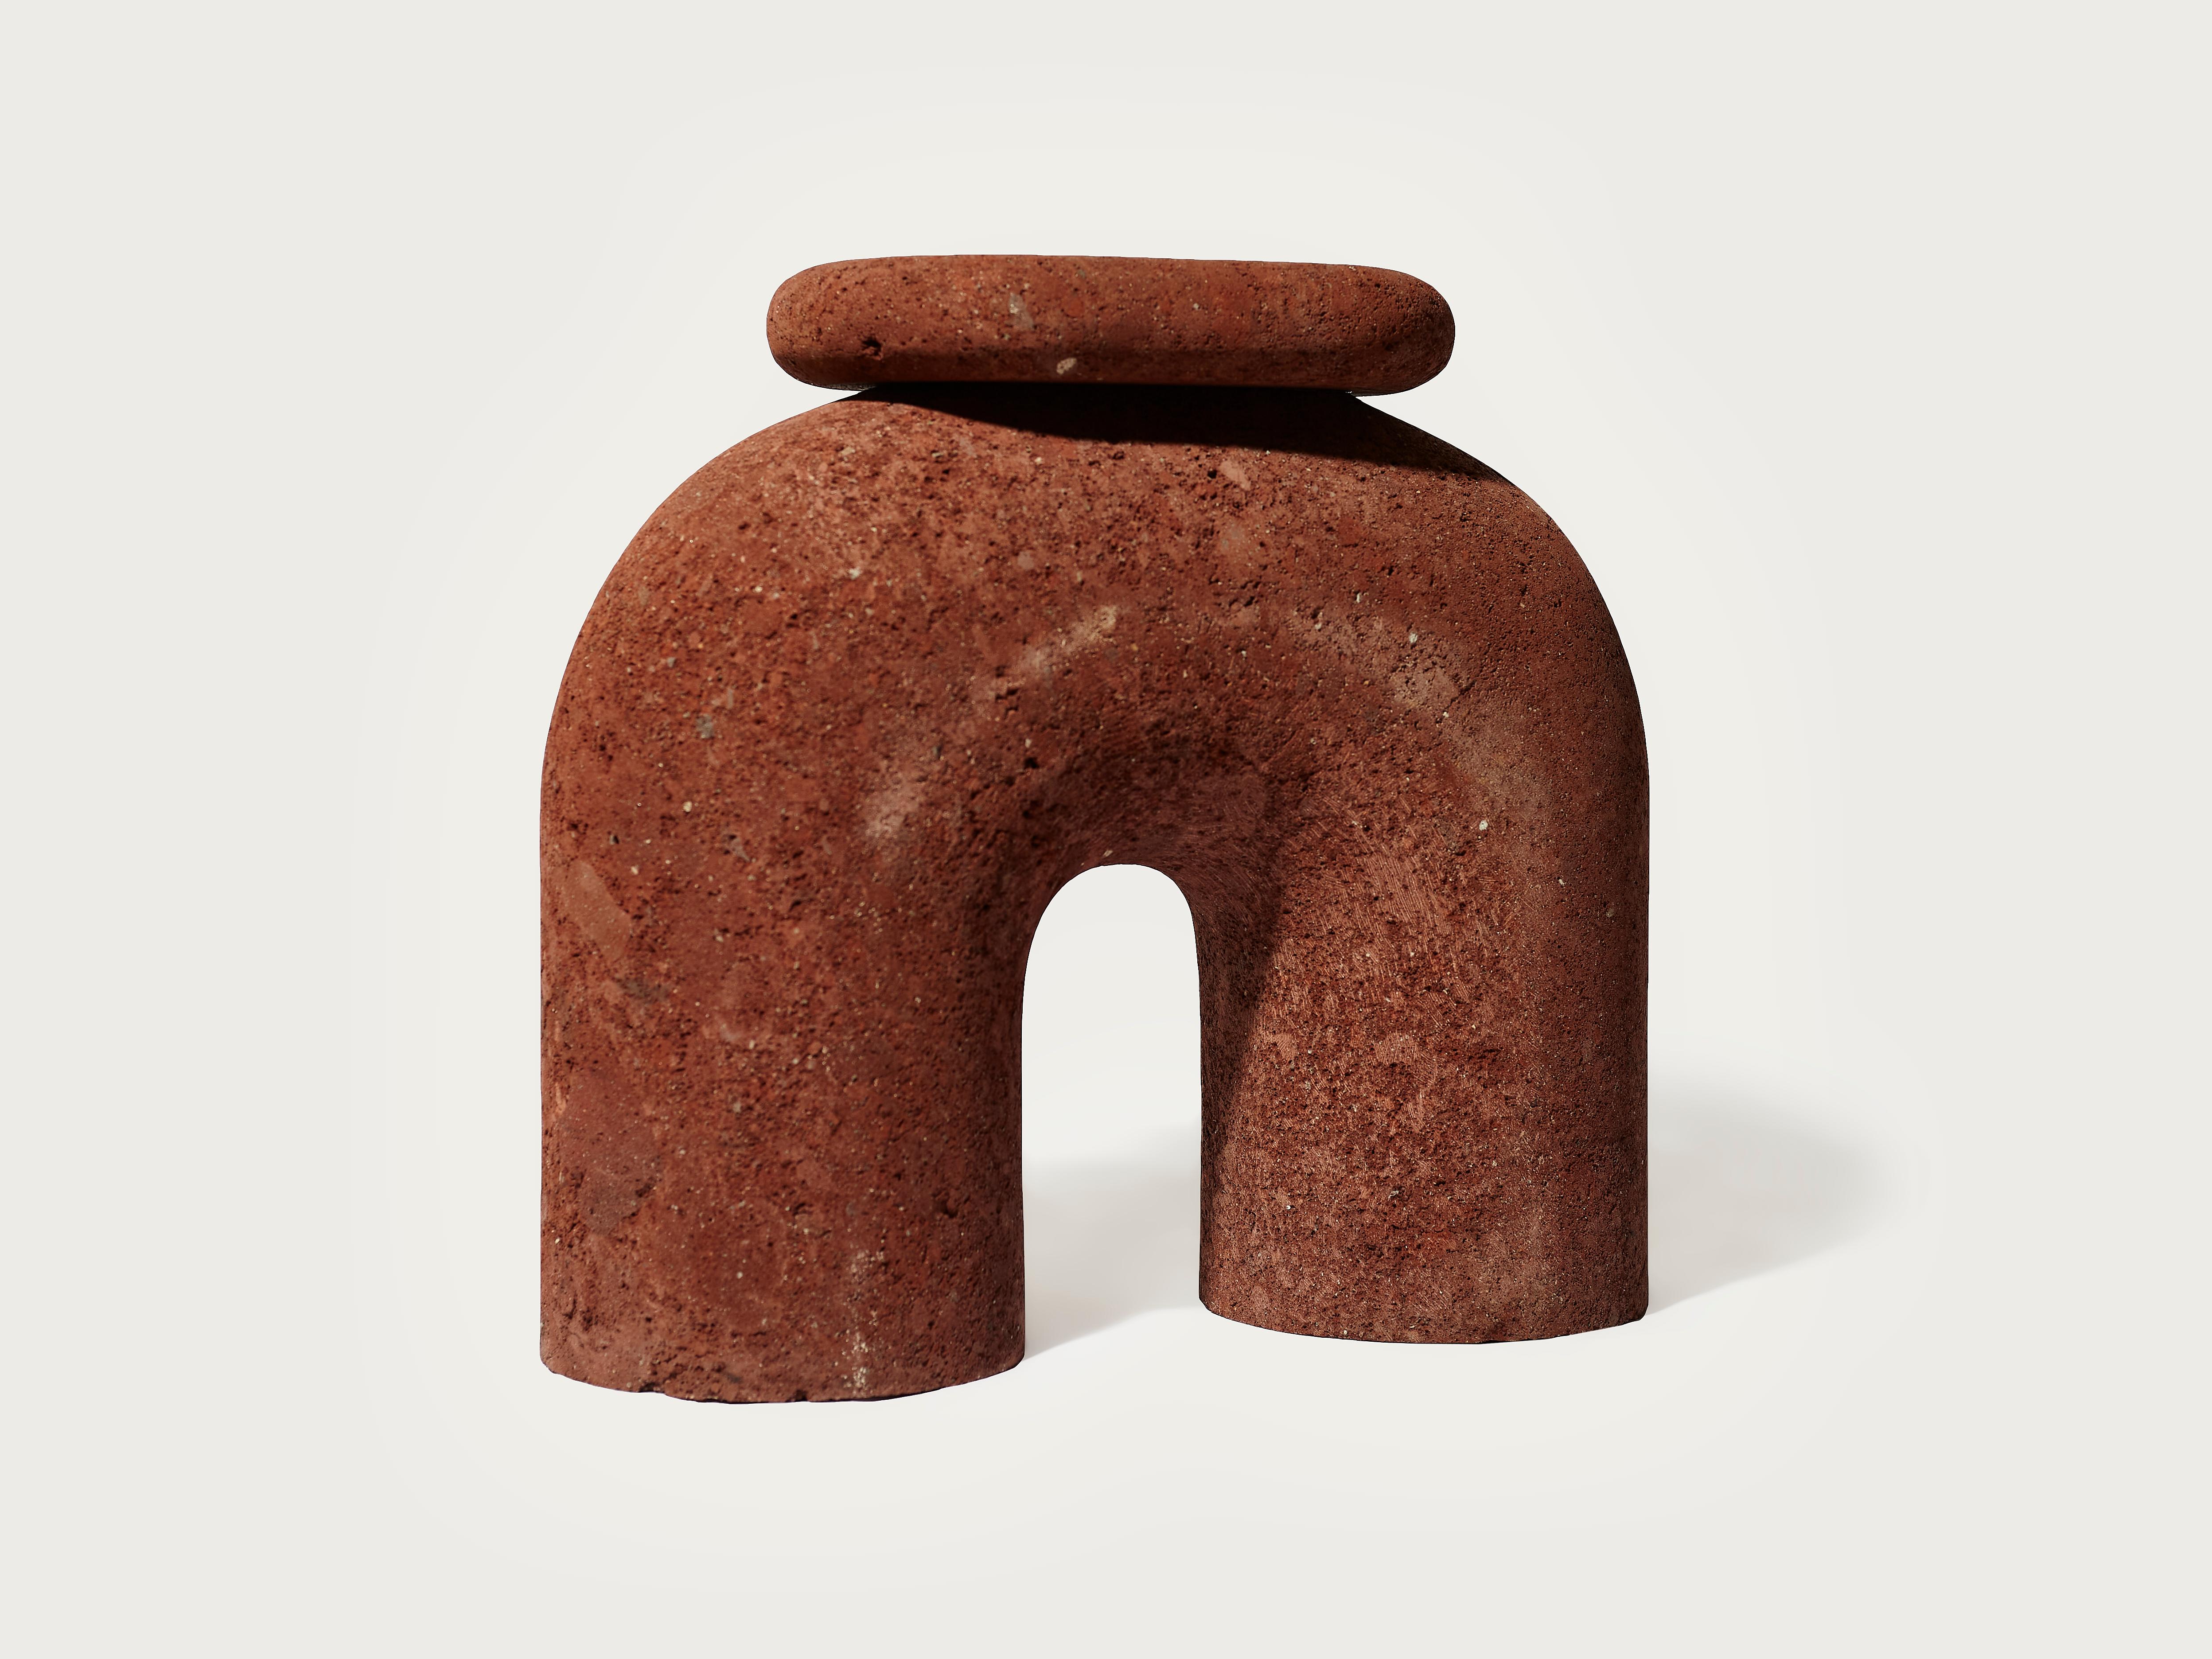 The design for Neolithic Thinker draws from different aesthetic historical references coming together in an idiosyncratic form that is at once primitive, modernist, pre-hispanic. It’s deliberately ambiguous design employs methodologies between the